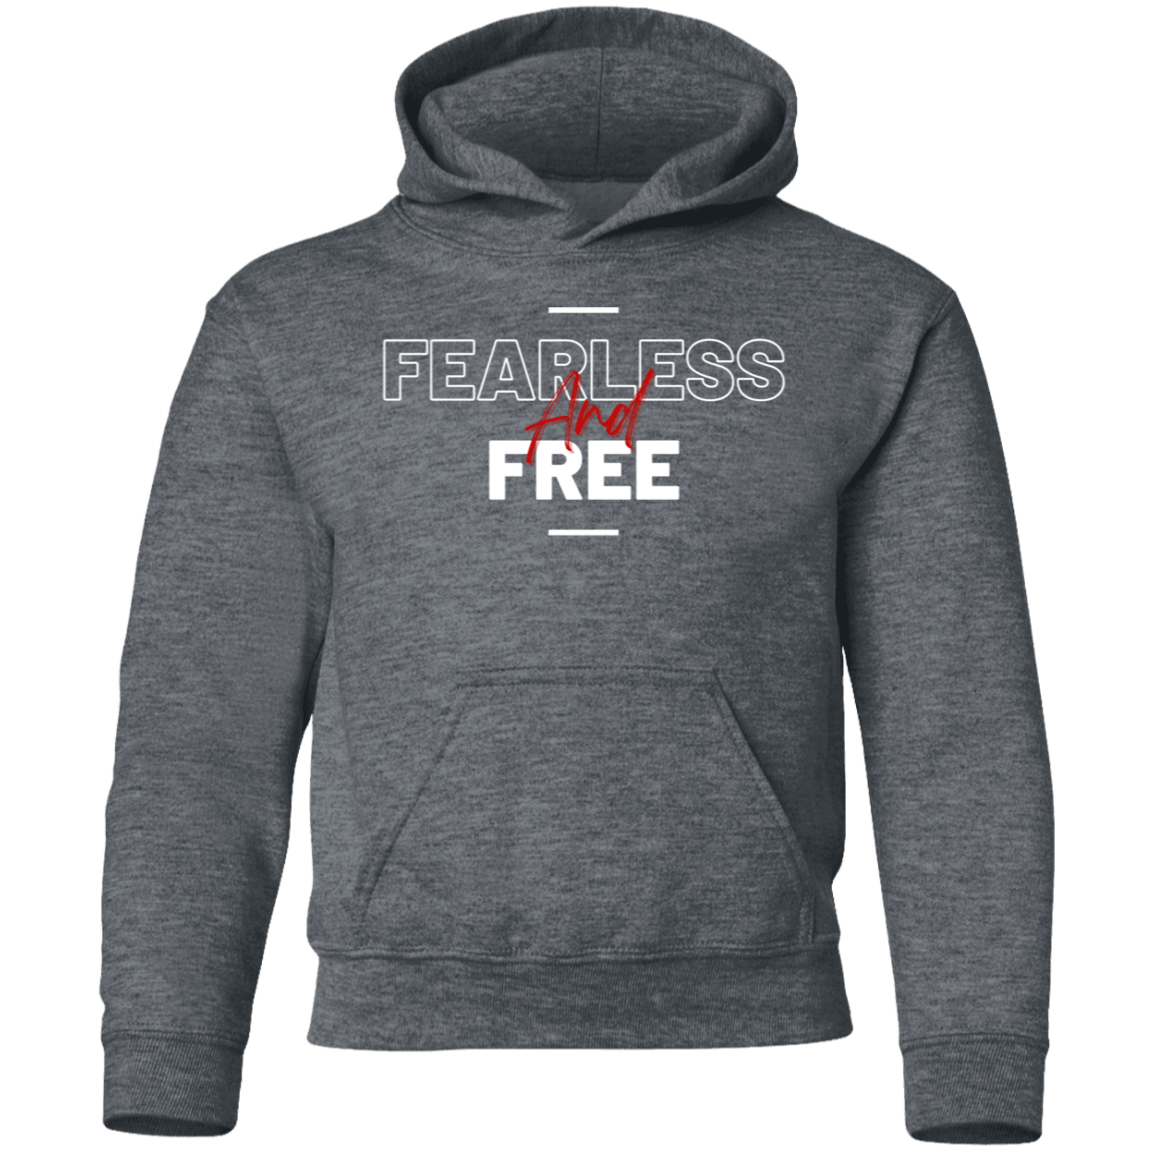 Fearless and Free Youth Hoodie